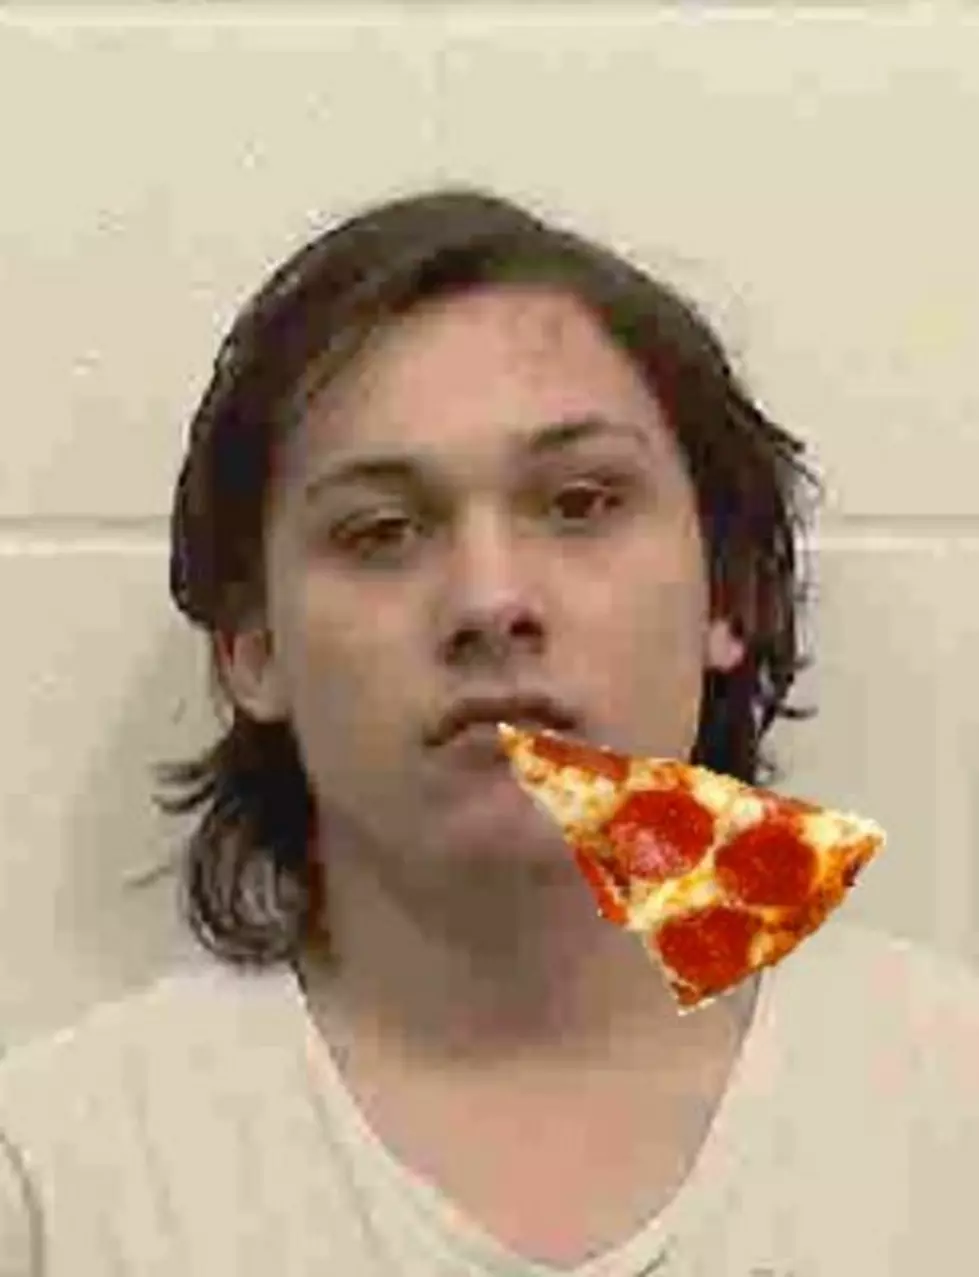 Pasco PD Capture Man Trying to Spend Night at Local Pizza Shop